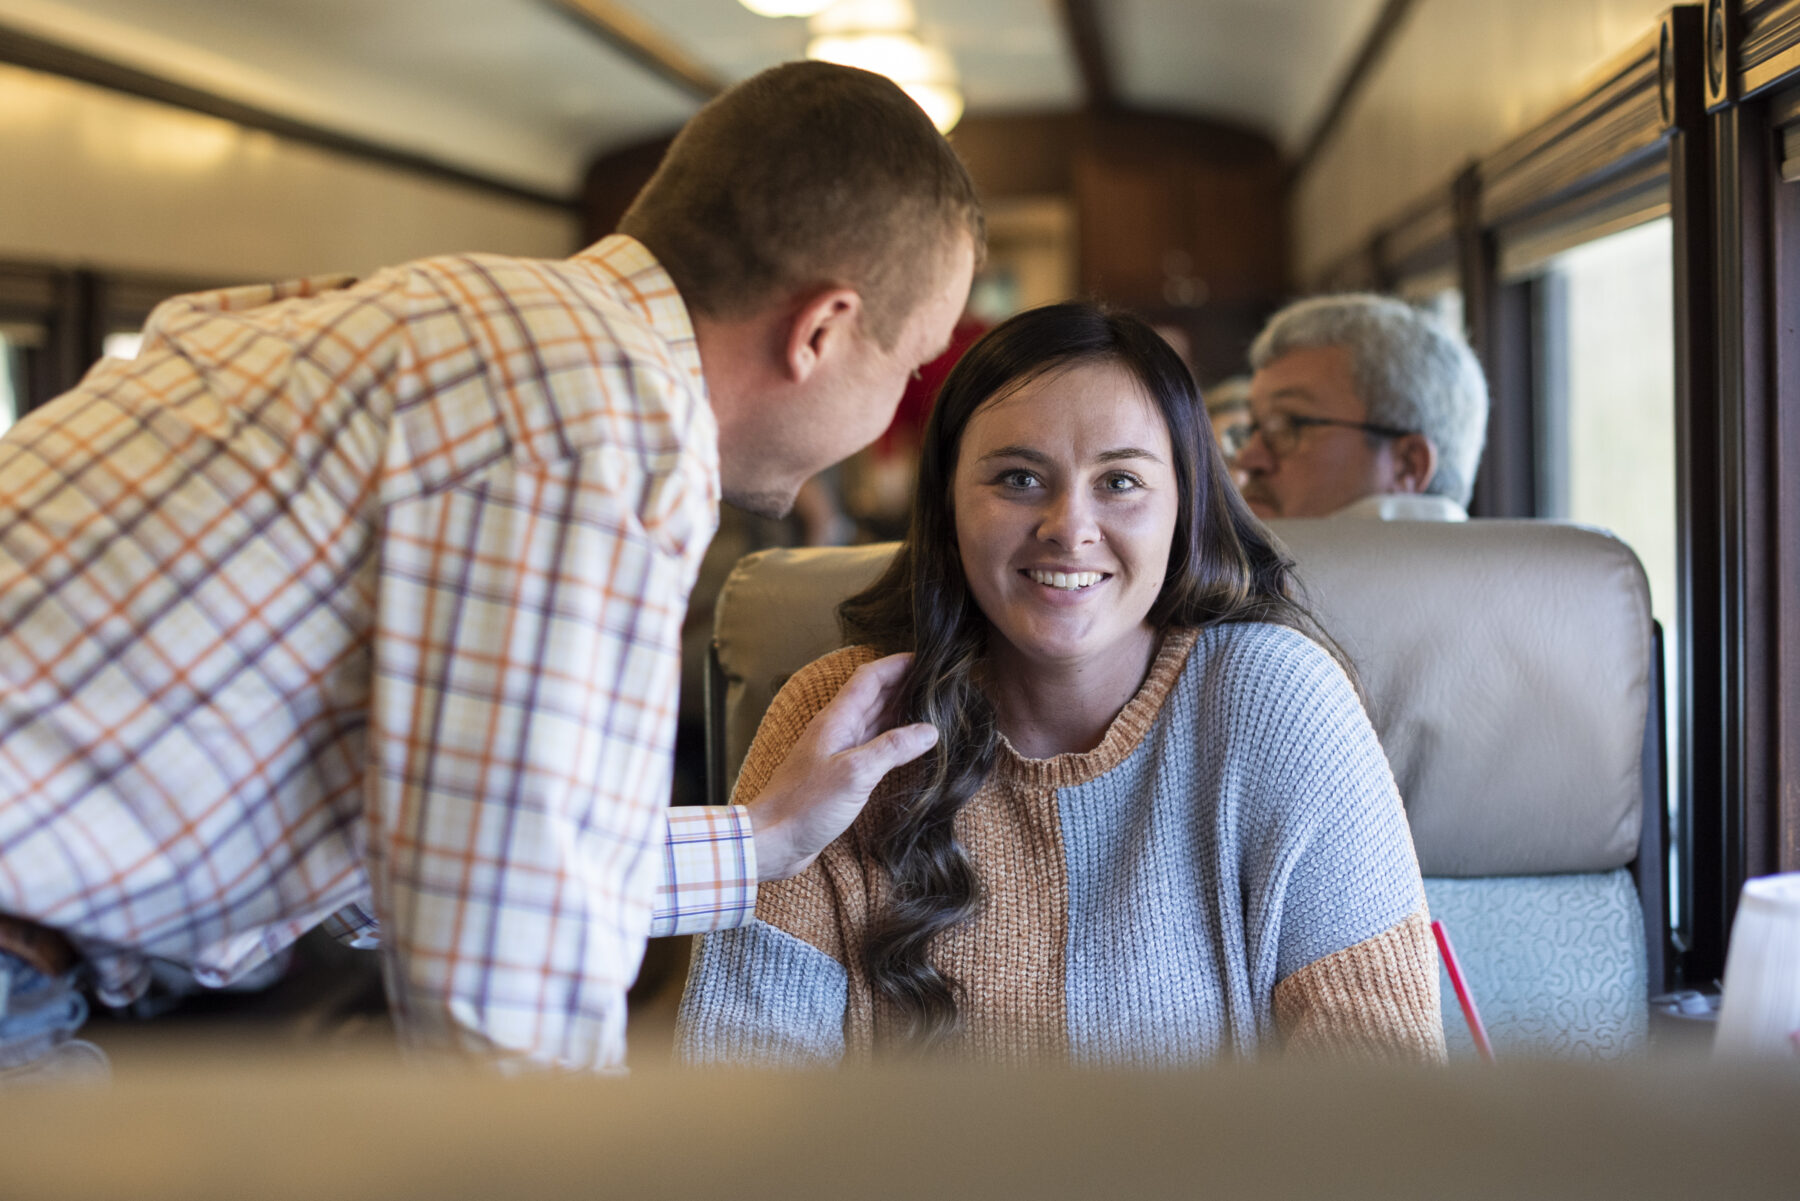 Train Ride Proposal in the Mountains | Popped Blog